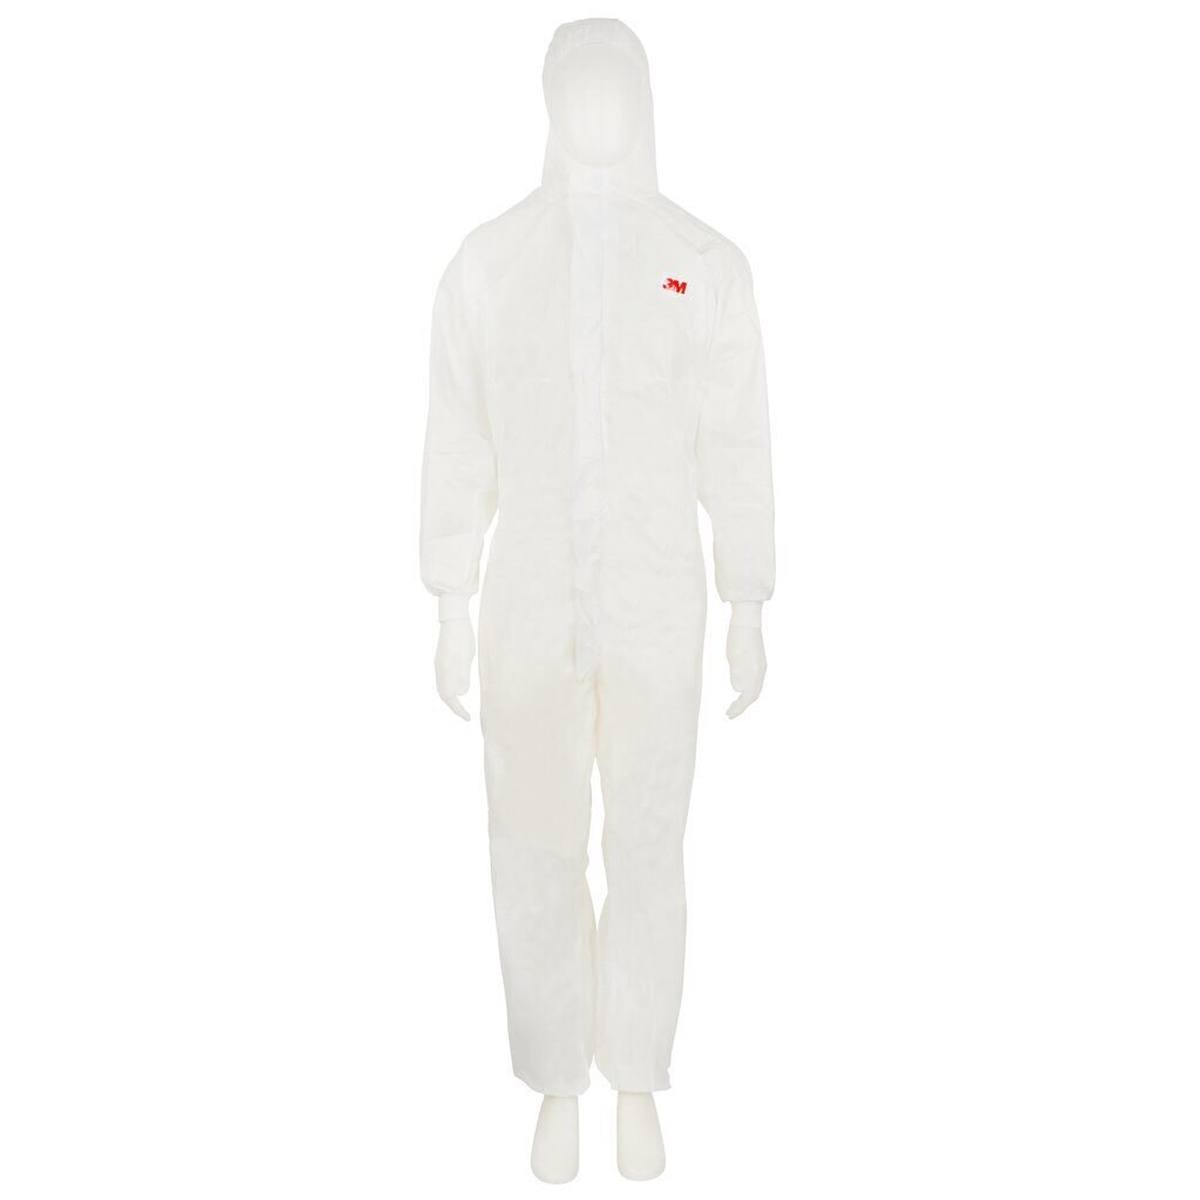 3M 4520 coverall, white+green, type 5/6, size XXL, material SMMS low-linting, breathable, antistatic, knitted cuffs